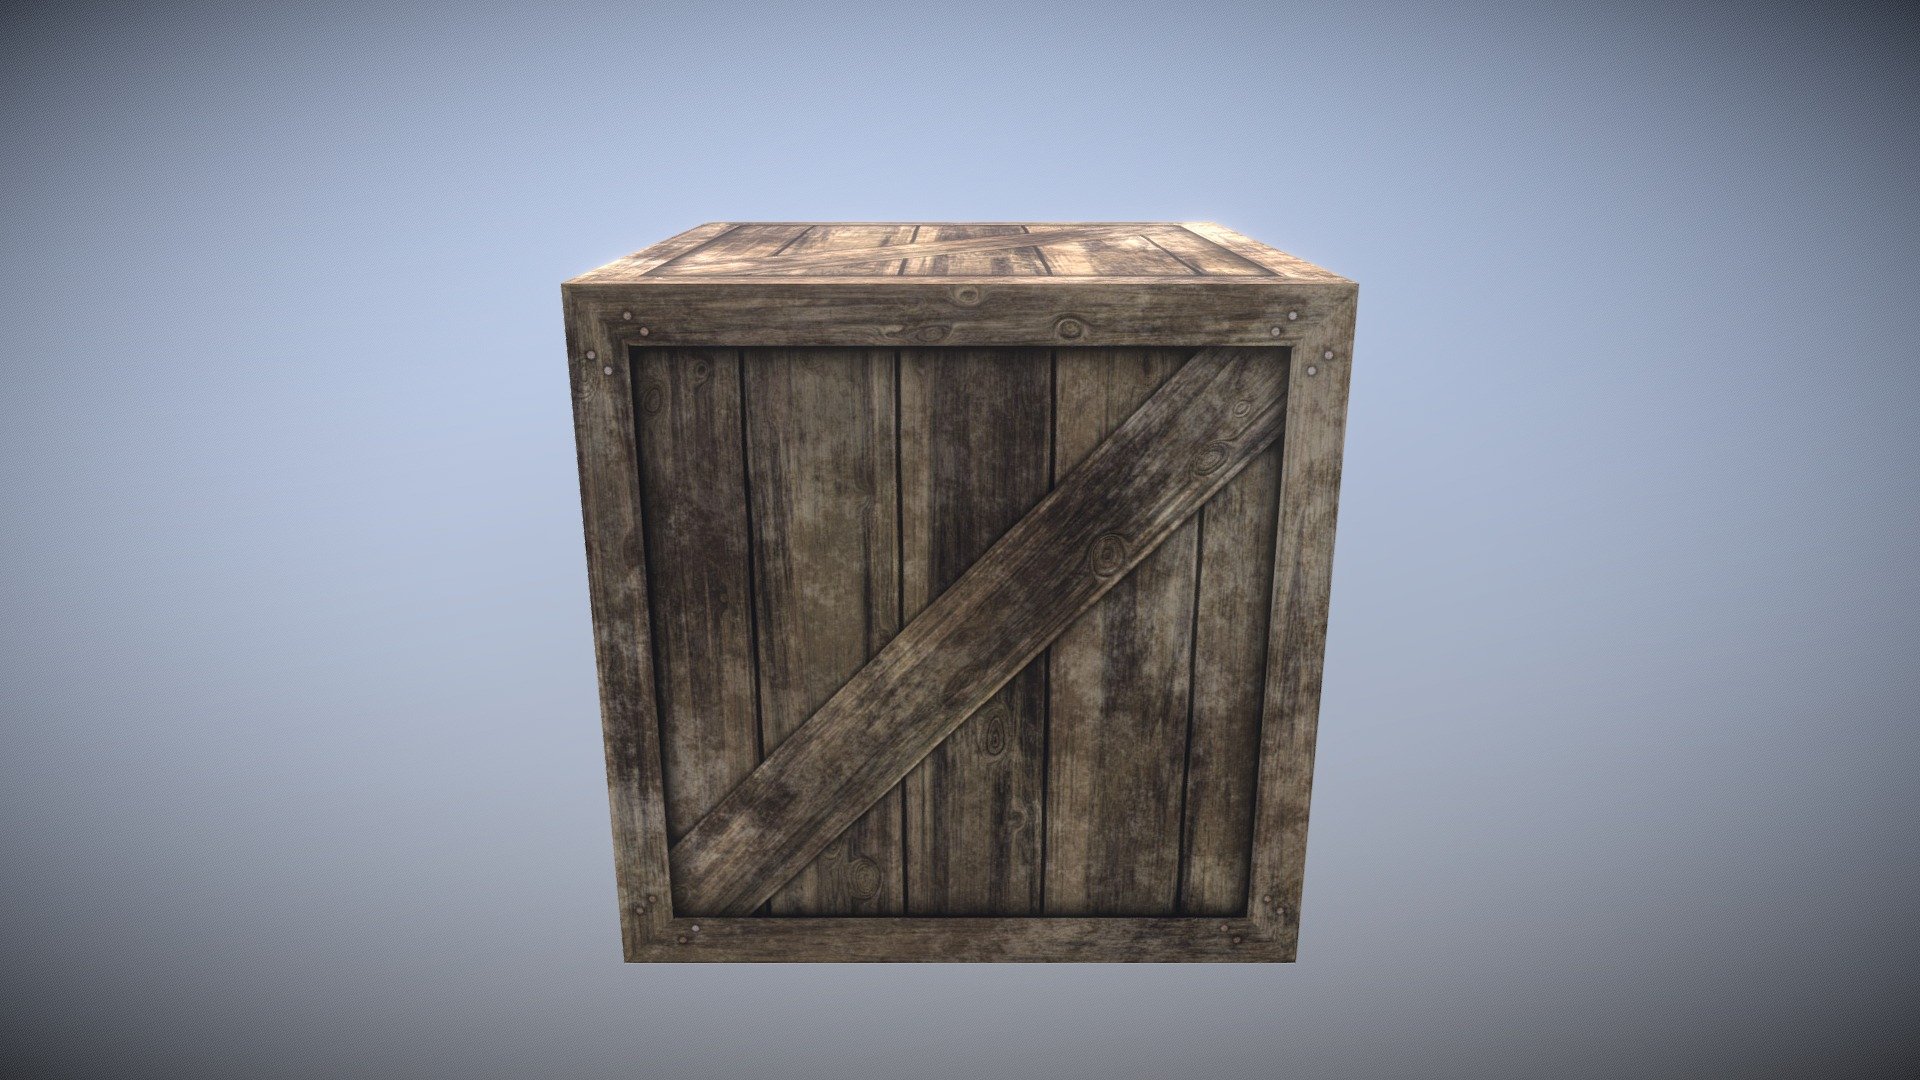 this is a Low Poly Wooden Crate with textures included
Game ready you can use it in your games (Best for mobile game)

please leave a comment and share your views on my work - Wooden Crate Game Asset - Download Free 3D model by Karthik Naidu (@Karthik_TS) 3d model